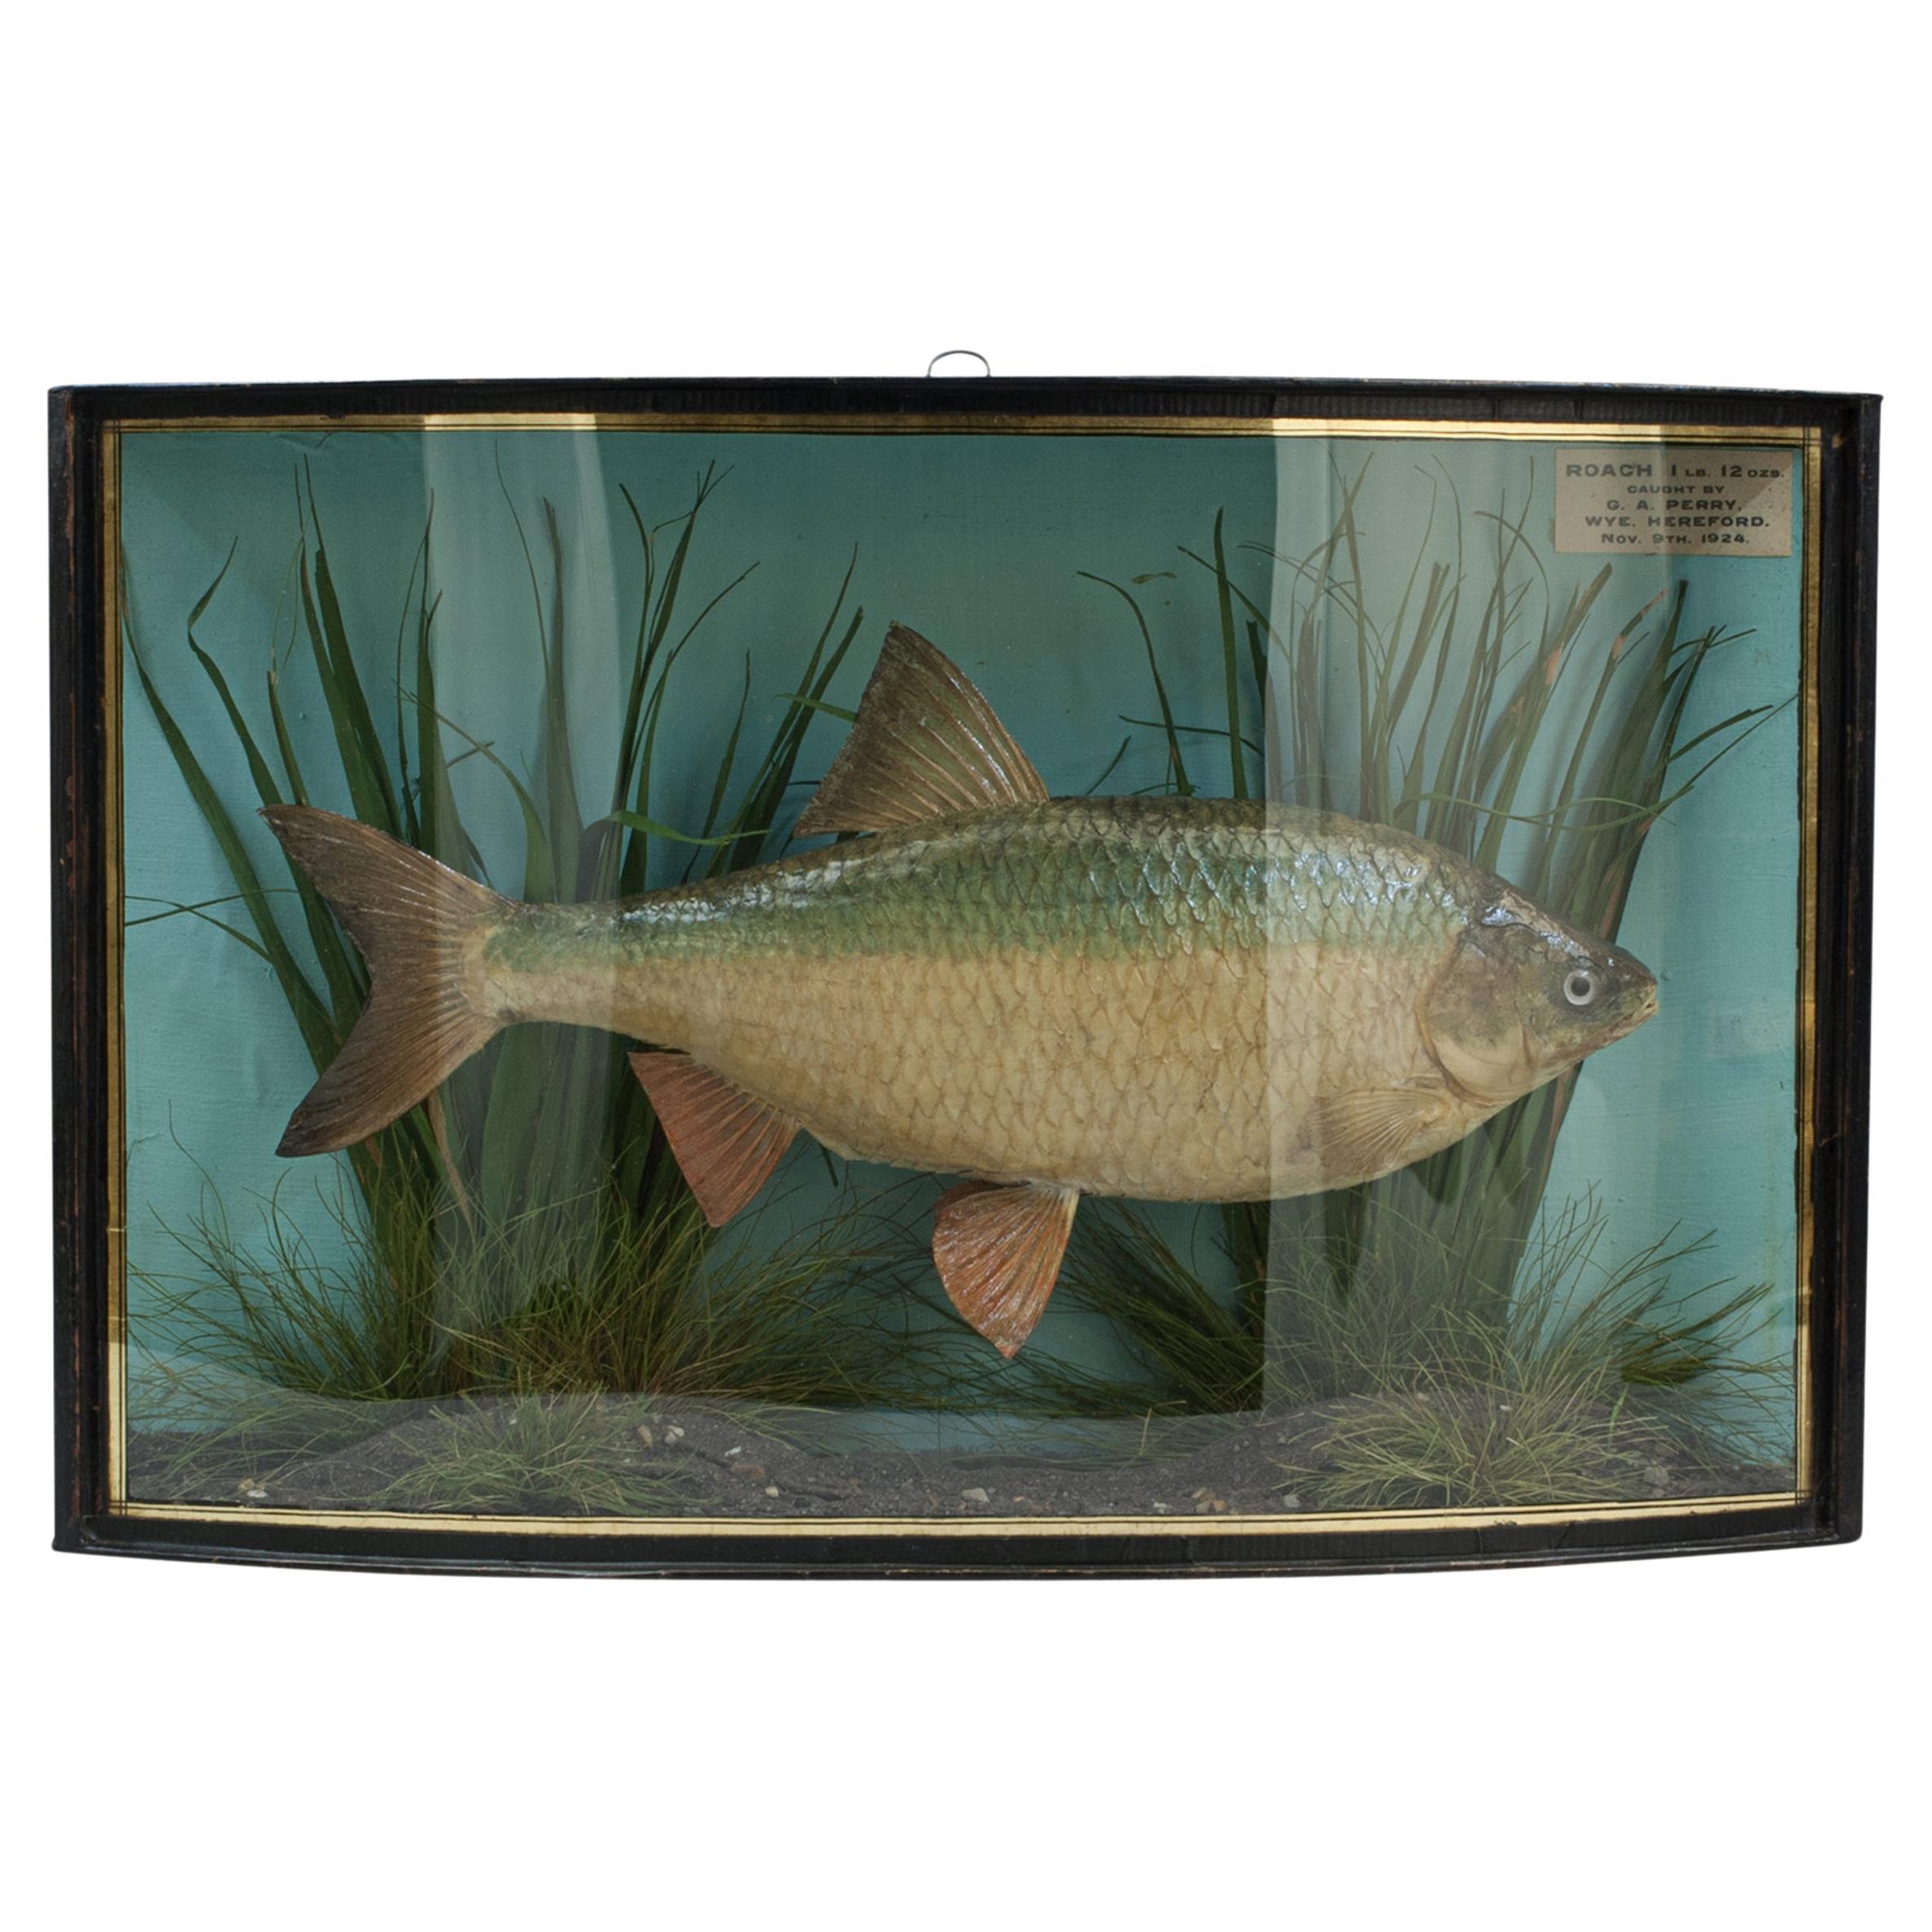 Pepared Fish in Bow Fronted Case, Roach For Sale